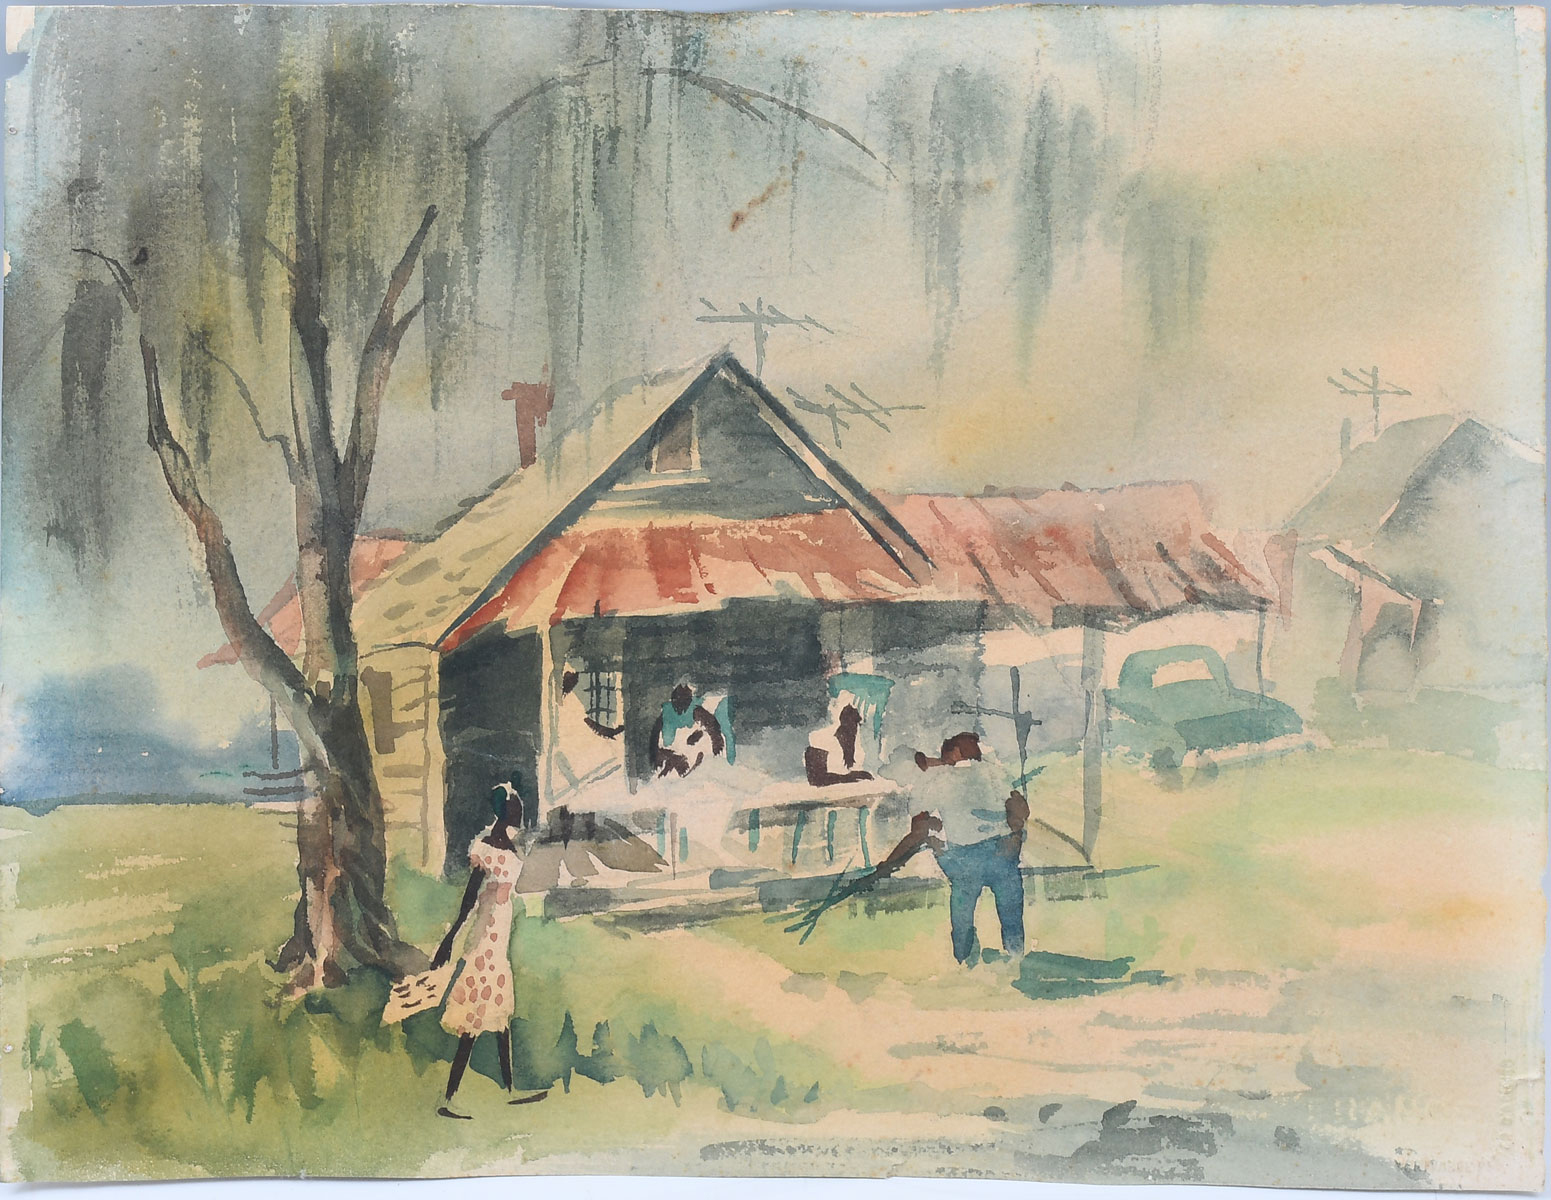 1950S FLORIDA CABIN PAINTING: Depicting